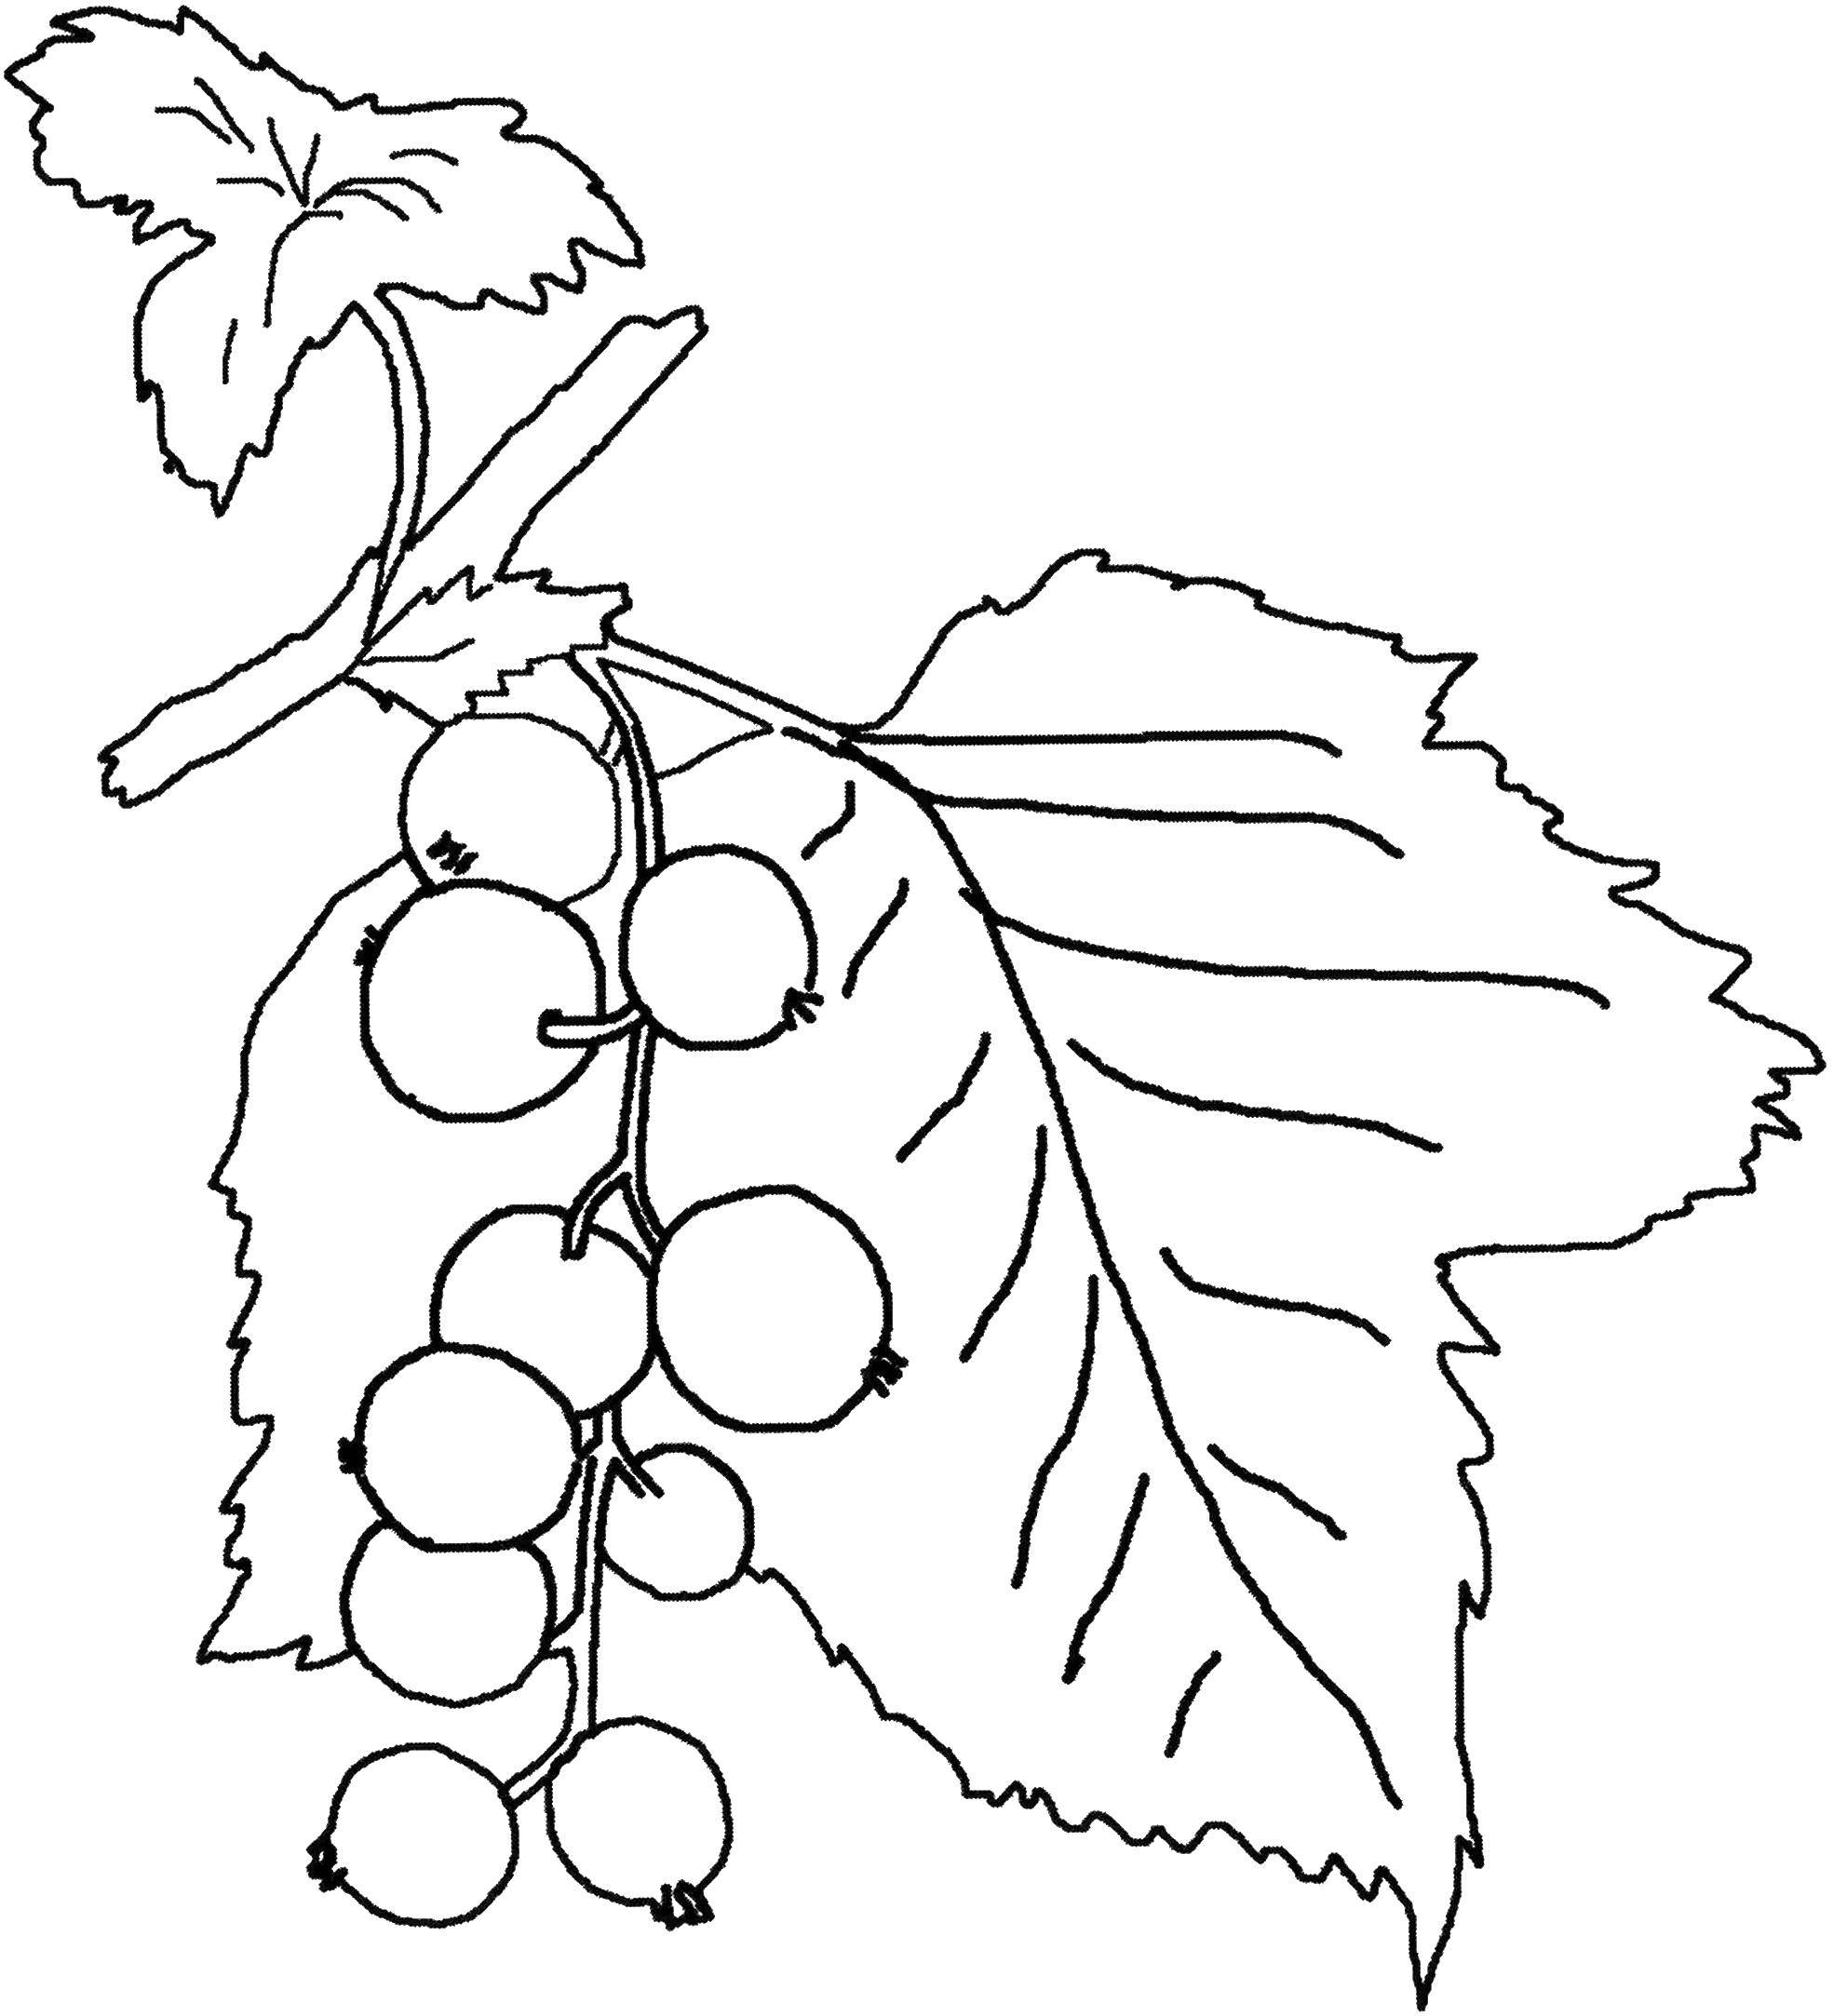 Coloring Currants. Category fruits. Tags:  fruits.